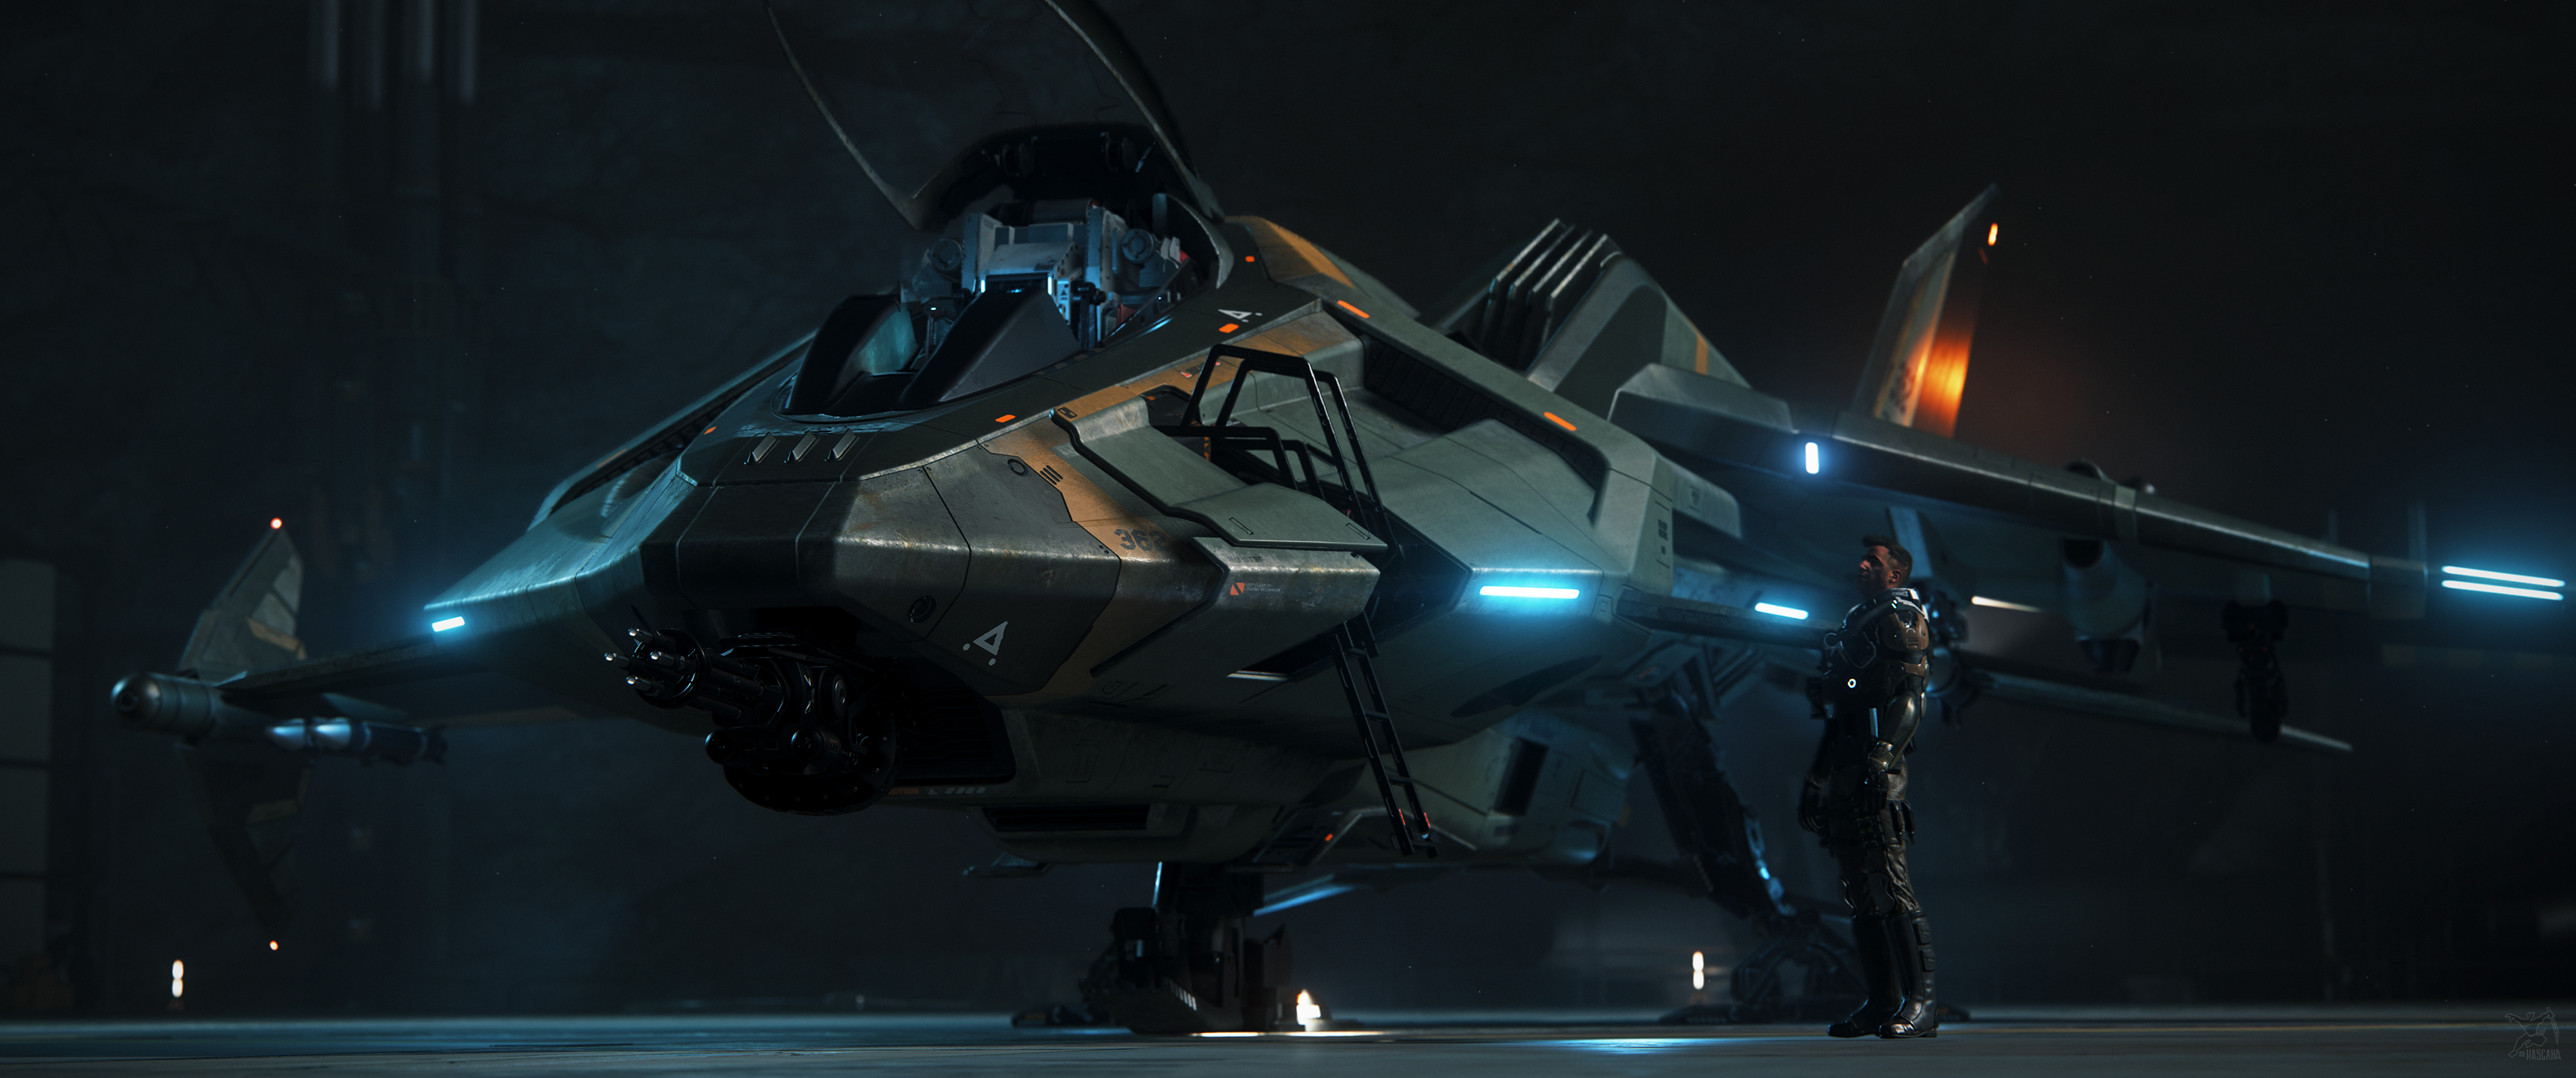 Aesthetically, The Gladius Is Still My Favorite Ship In Game